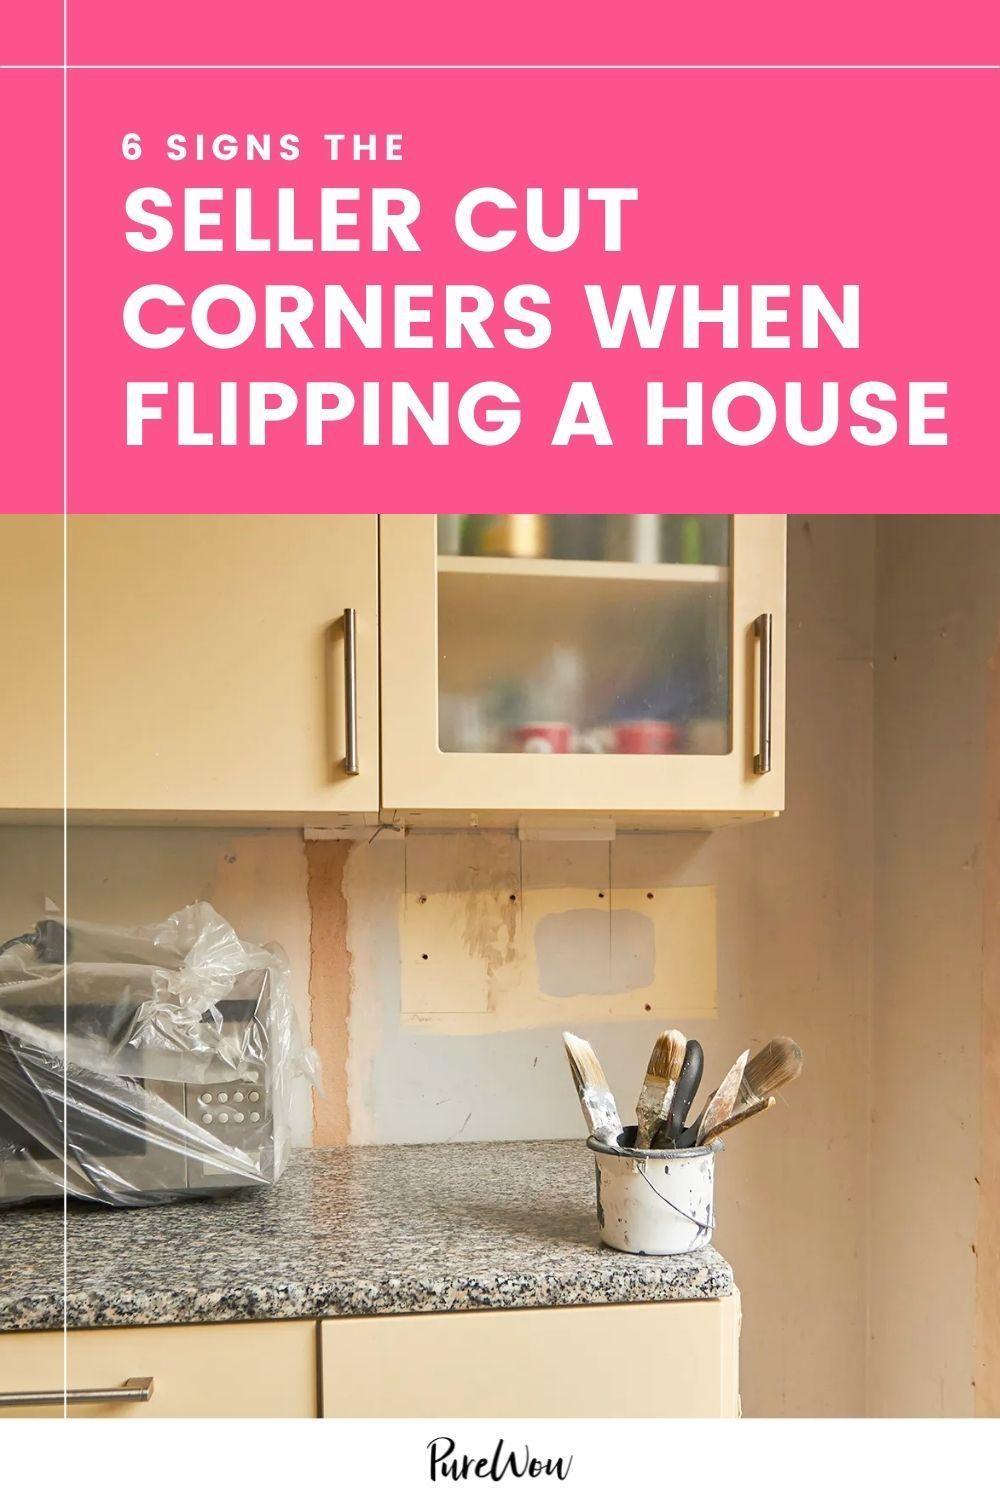 6 Signs the Seller Cut Corners When Flipping a House